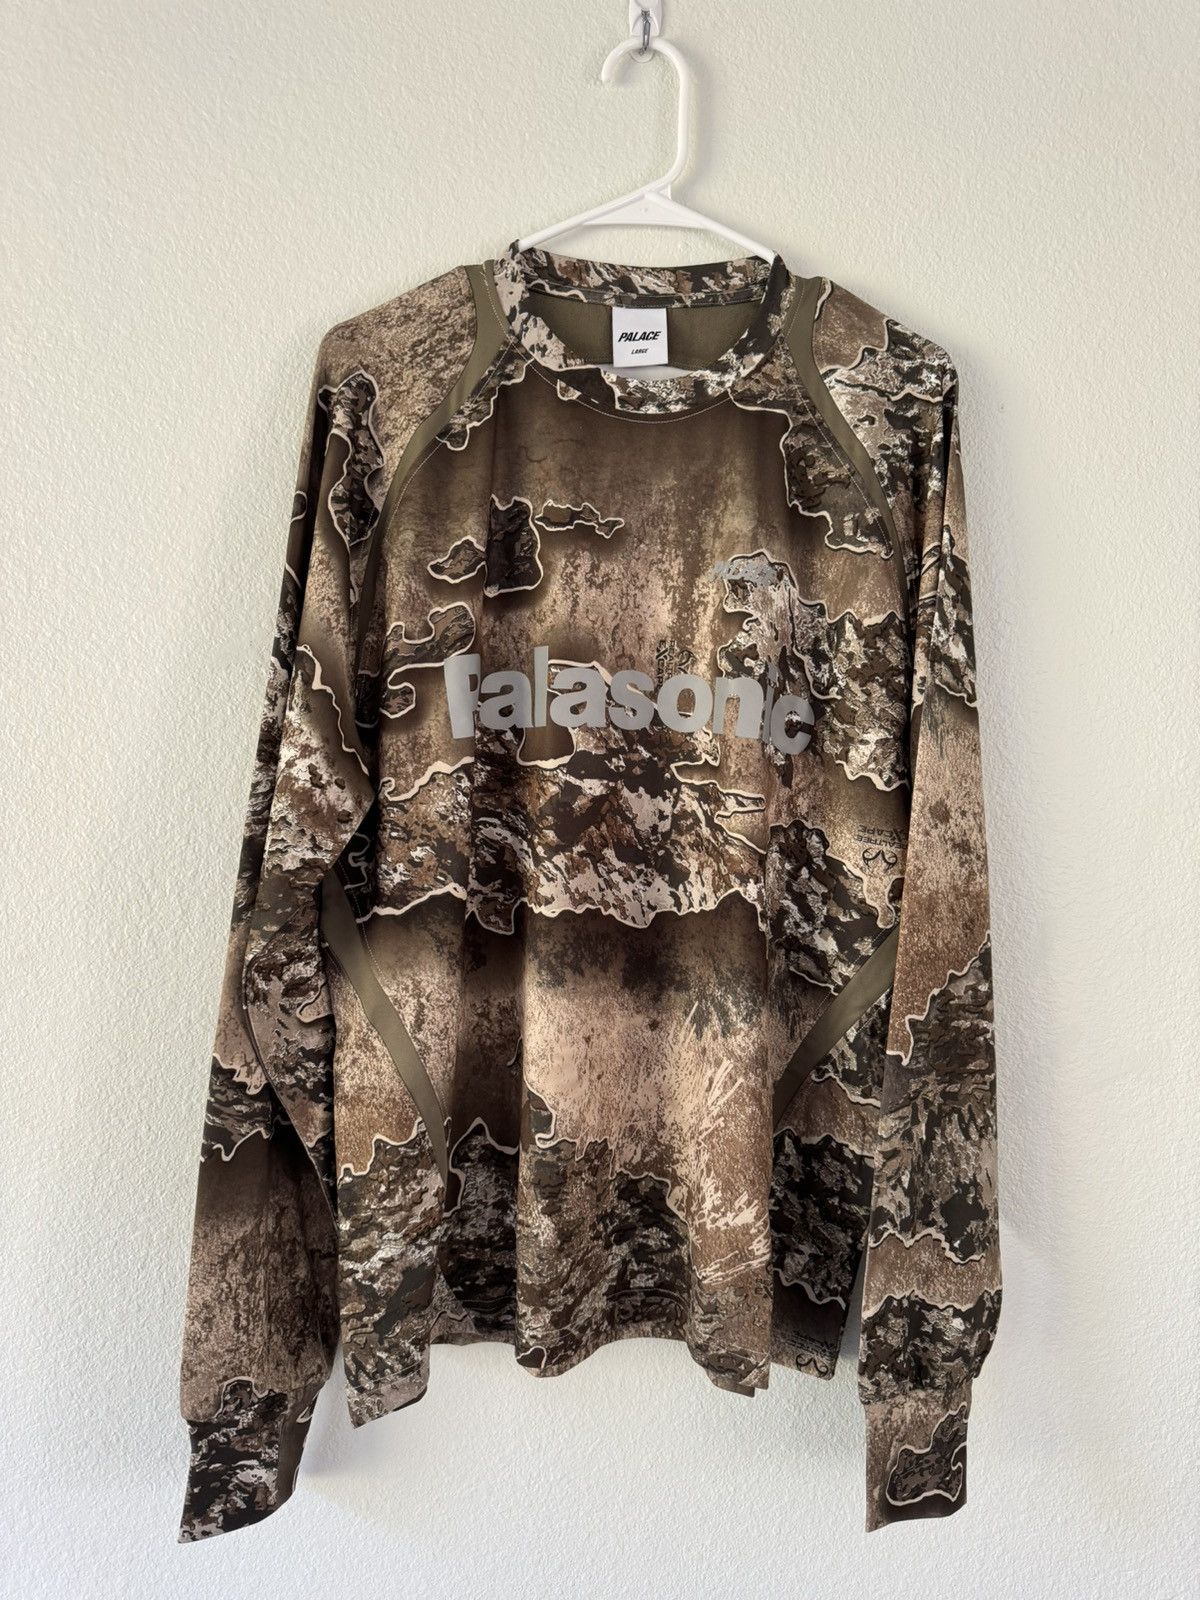 Palace Palace Trail Runner Long Sleeve Camo Size Large | Grailed